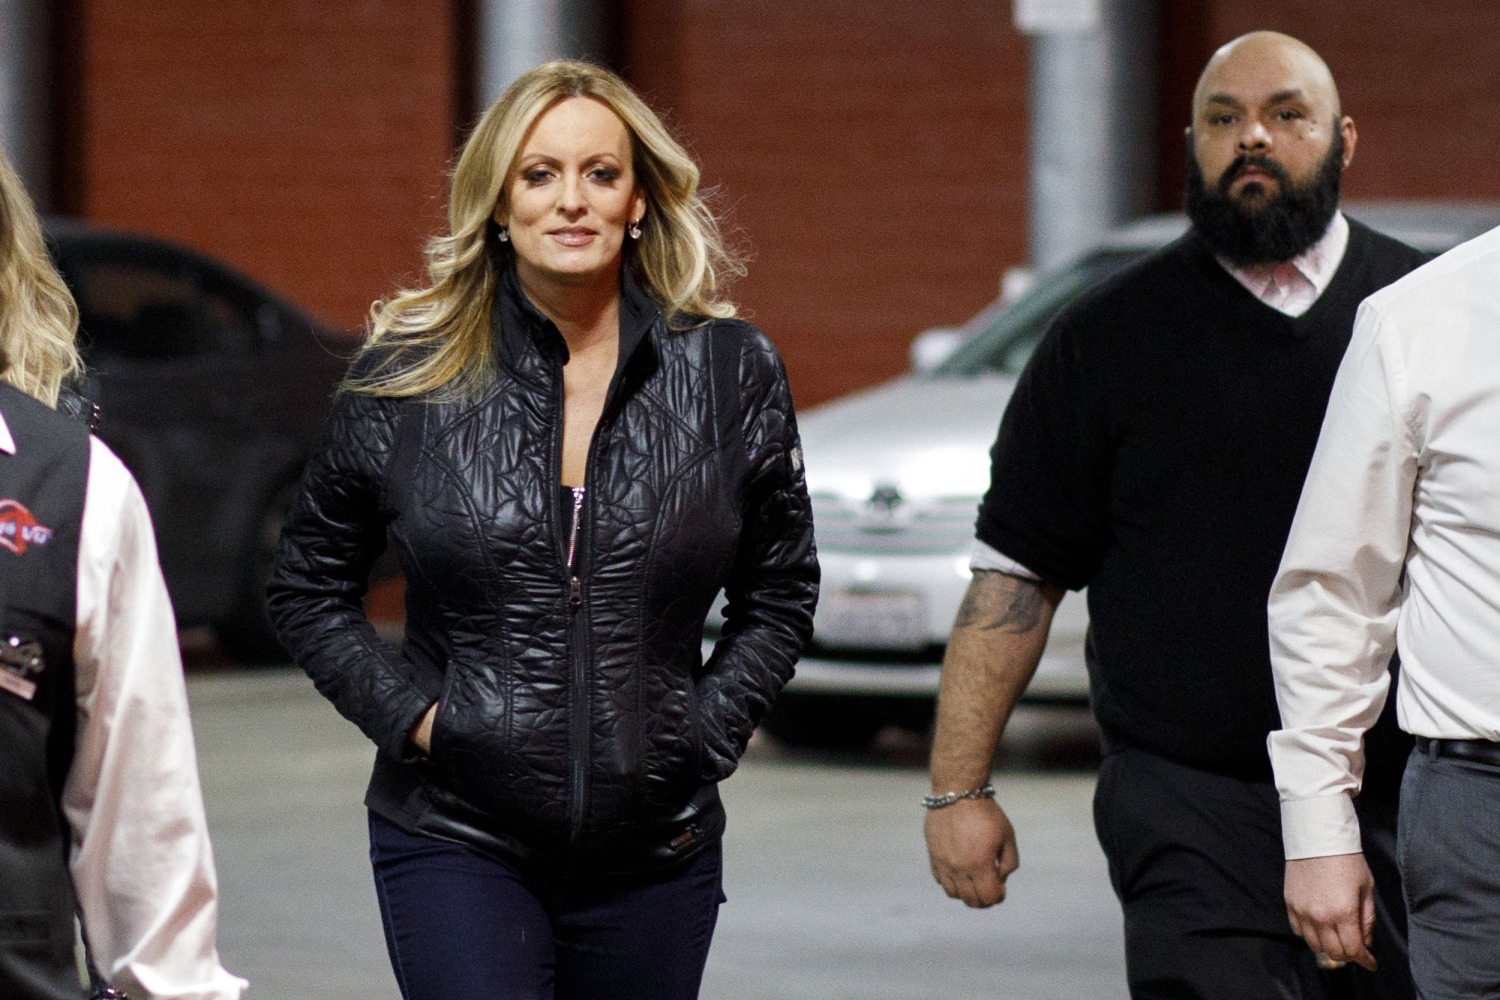 Xxx Phone Force Blackmail - Trump attorney seeks to force Stormy Daniels lawsuit into arbitration